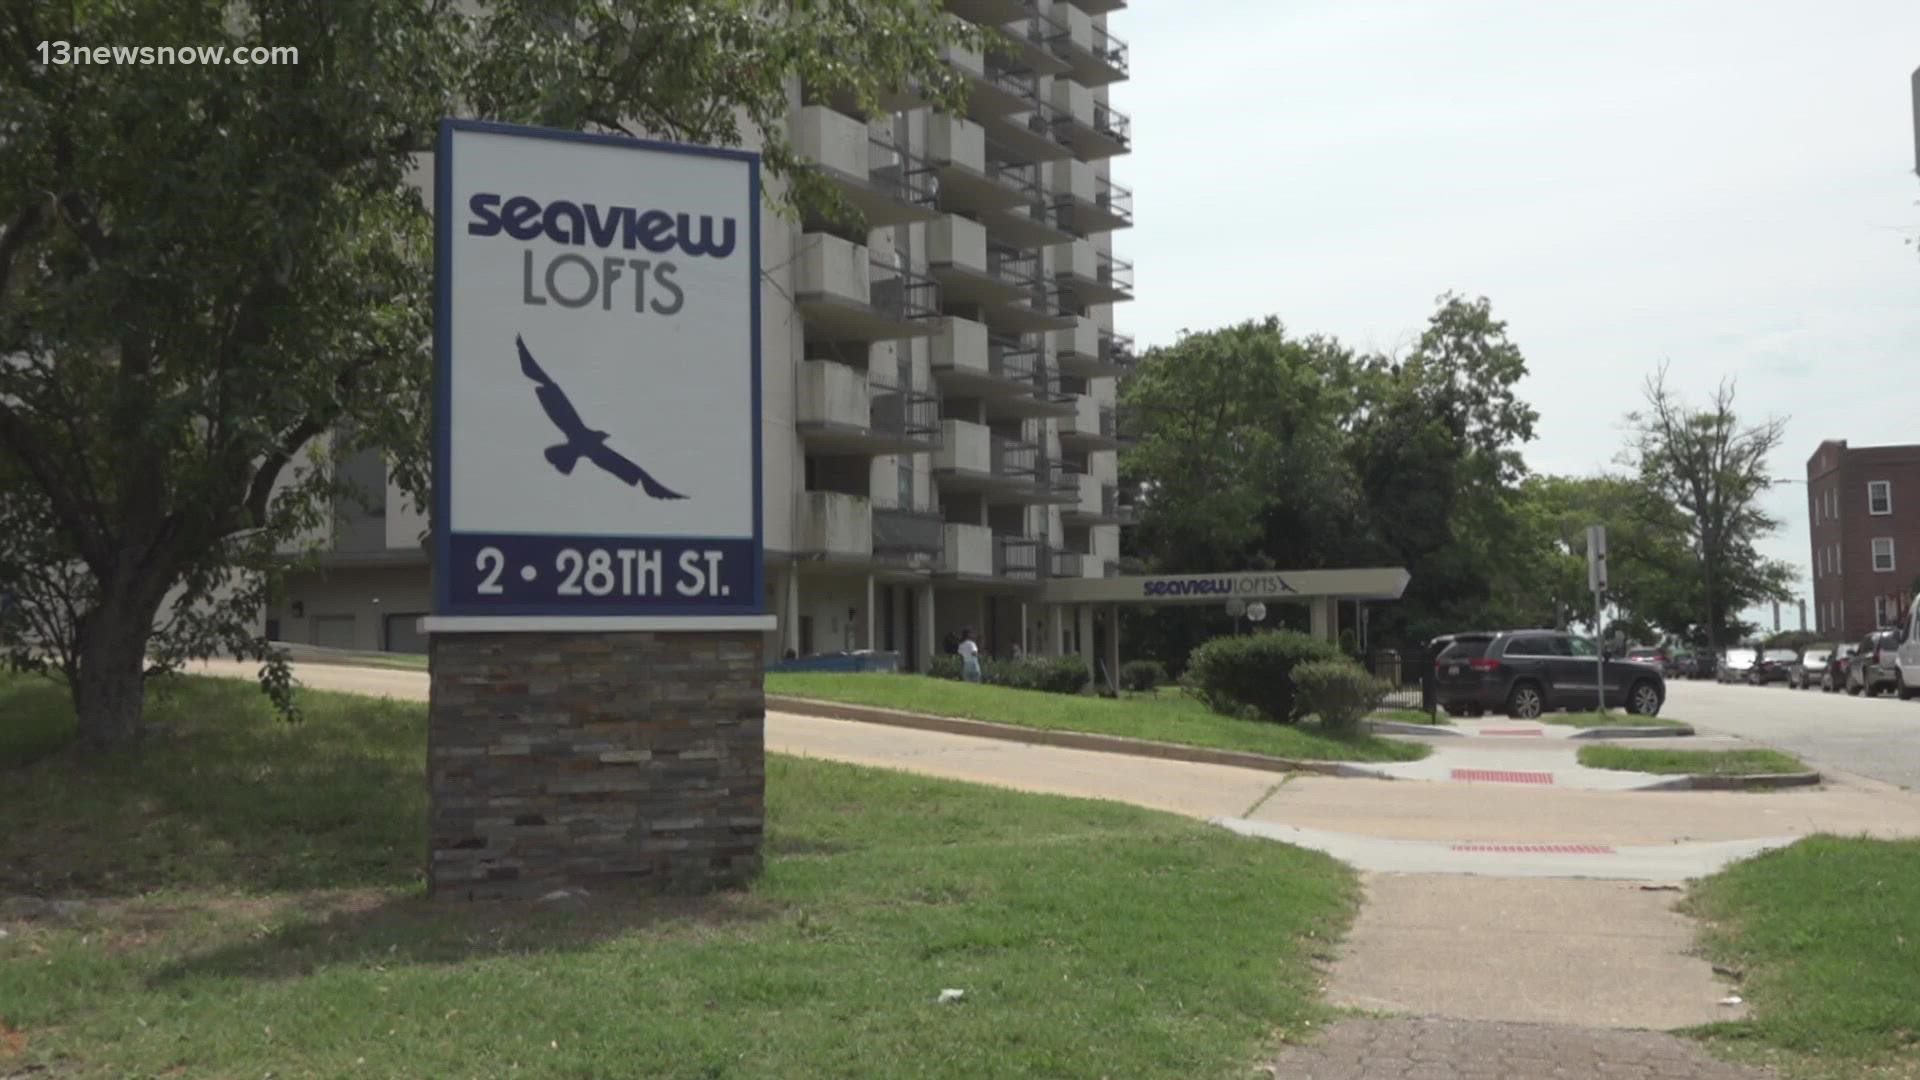 SeaView Lofts has reportedly been deemed "unsafe for occupancy."